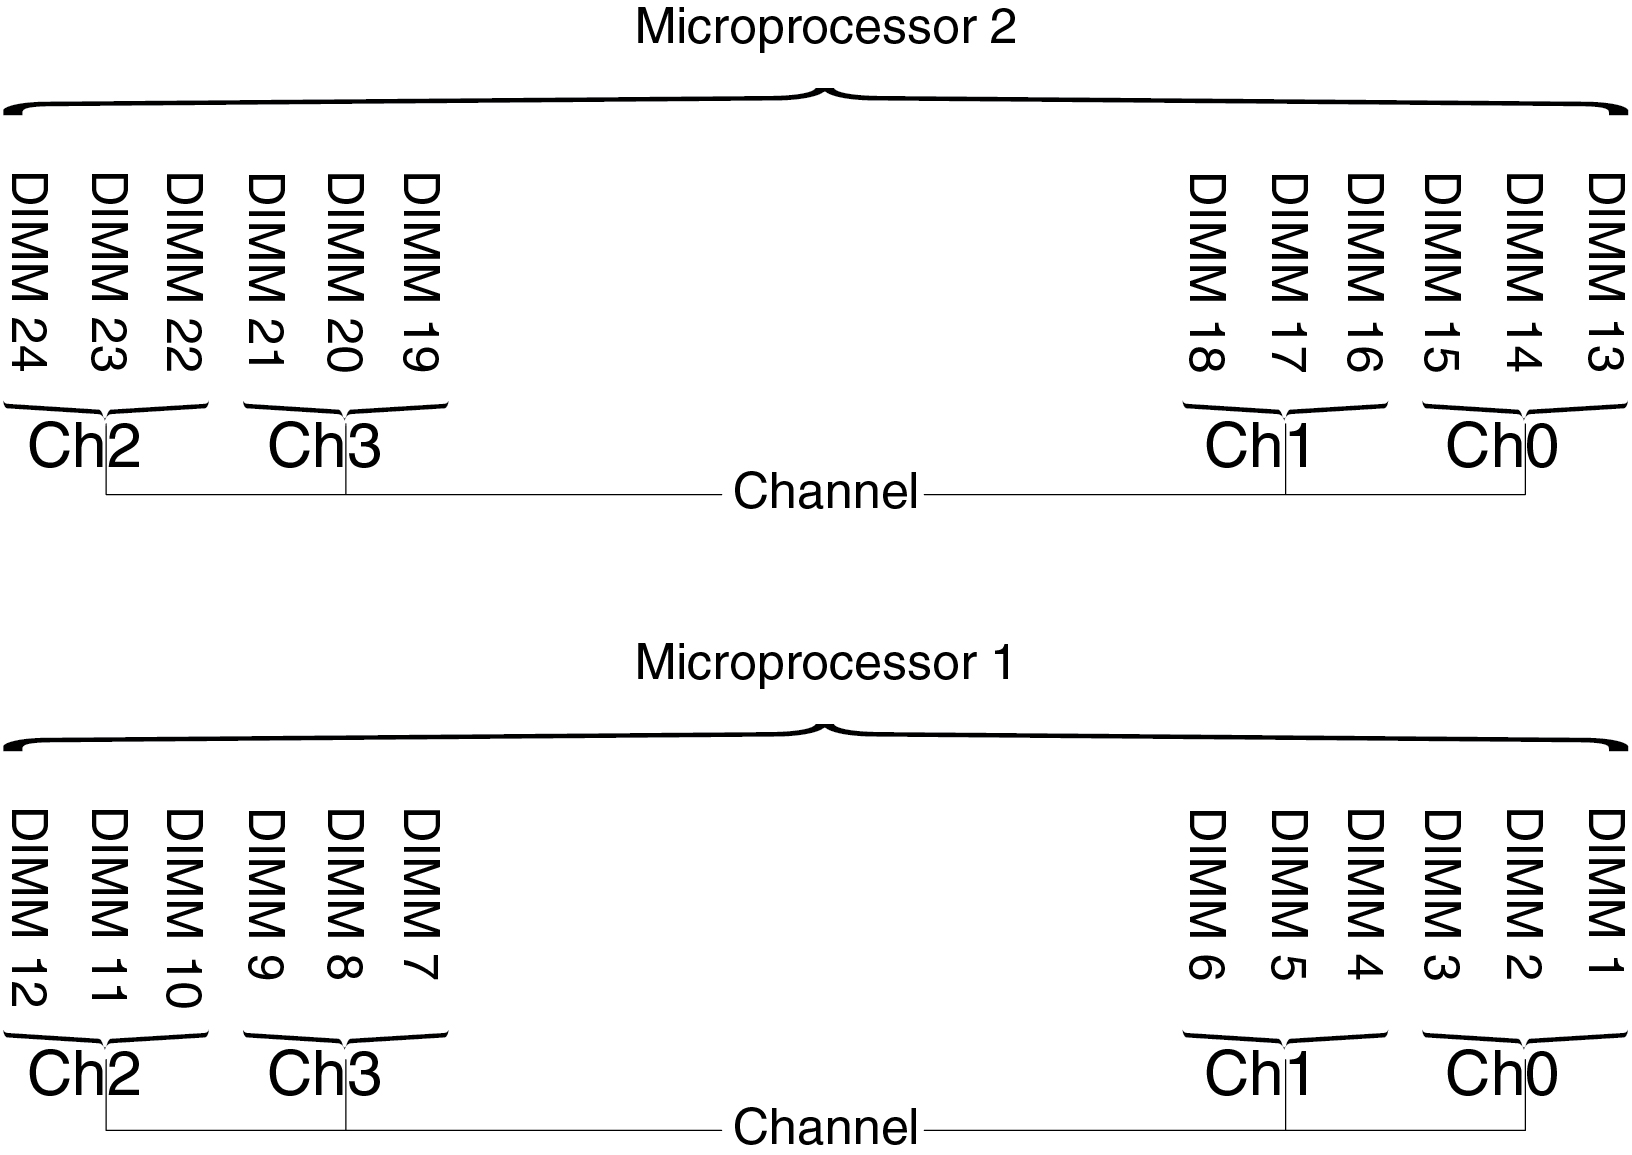 Connectors on each memory channel